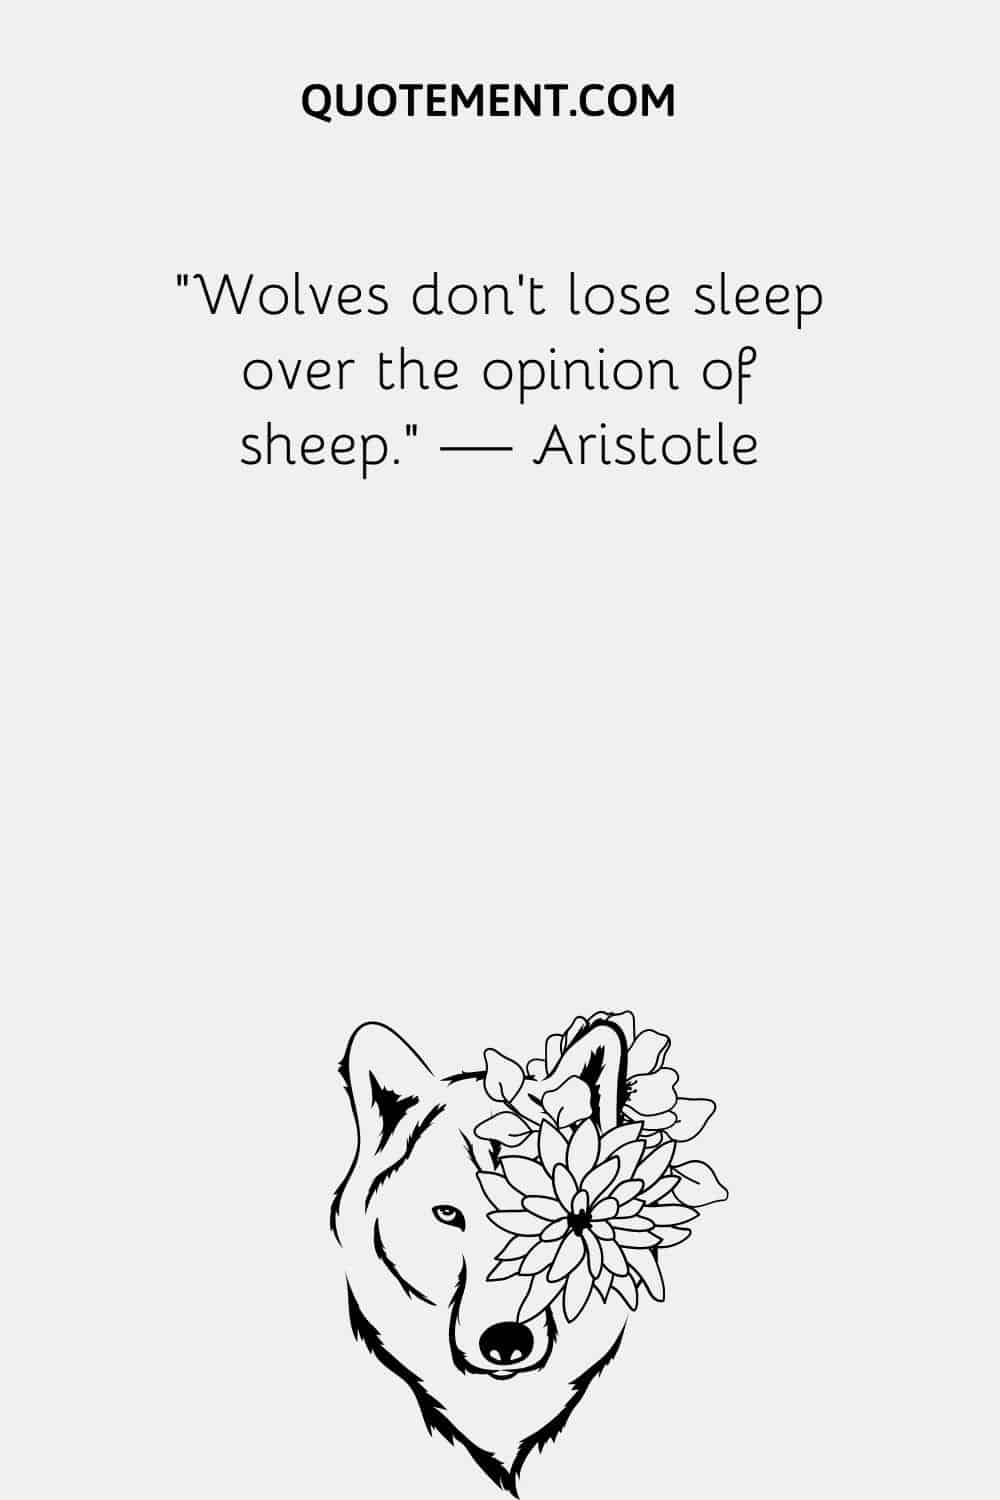 Wolves don’t lose sleep over the opinion of sheep